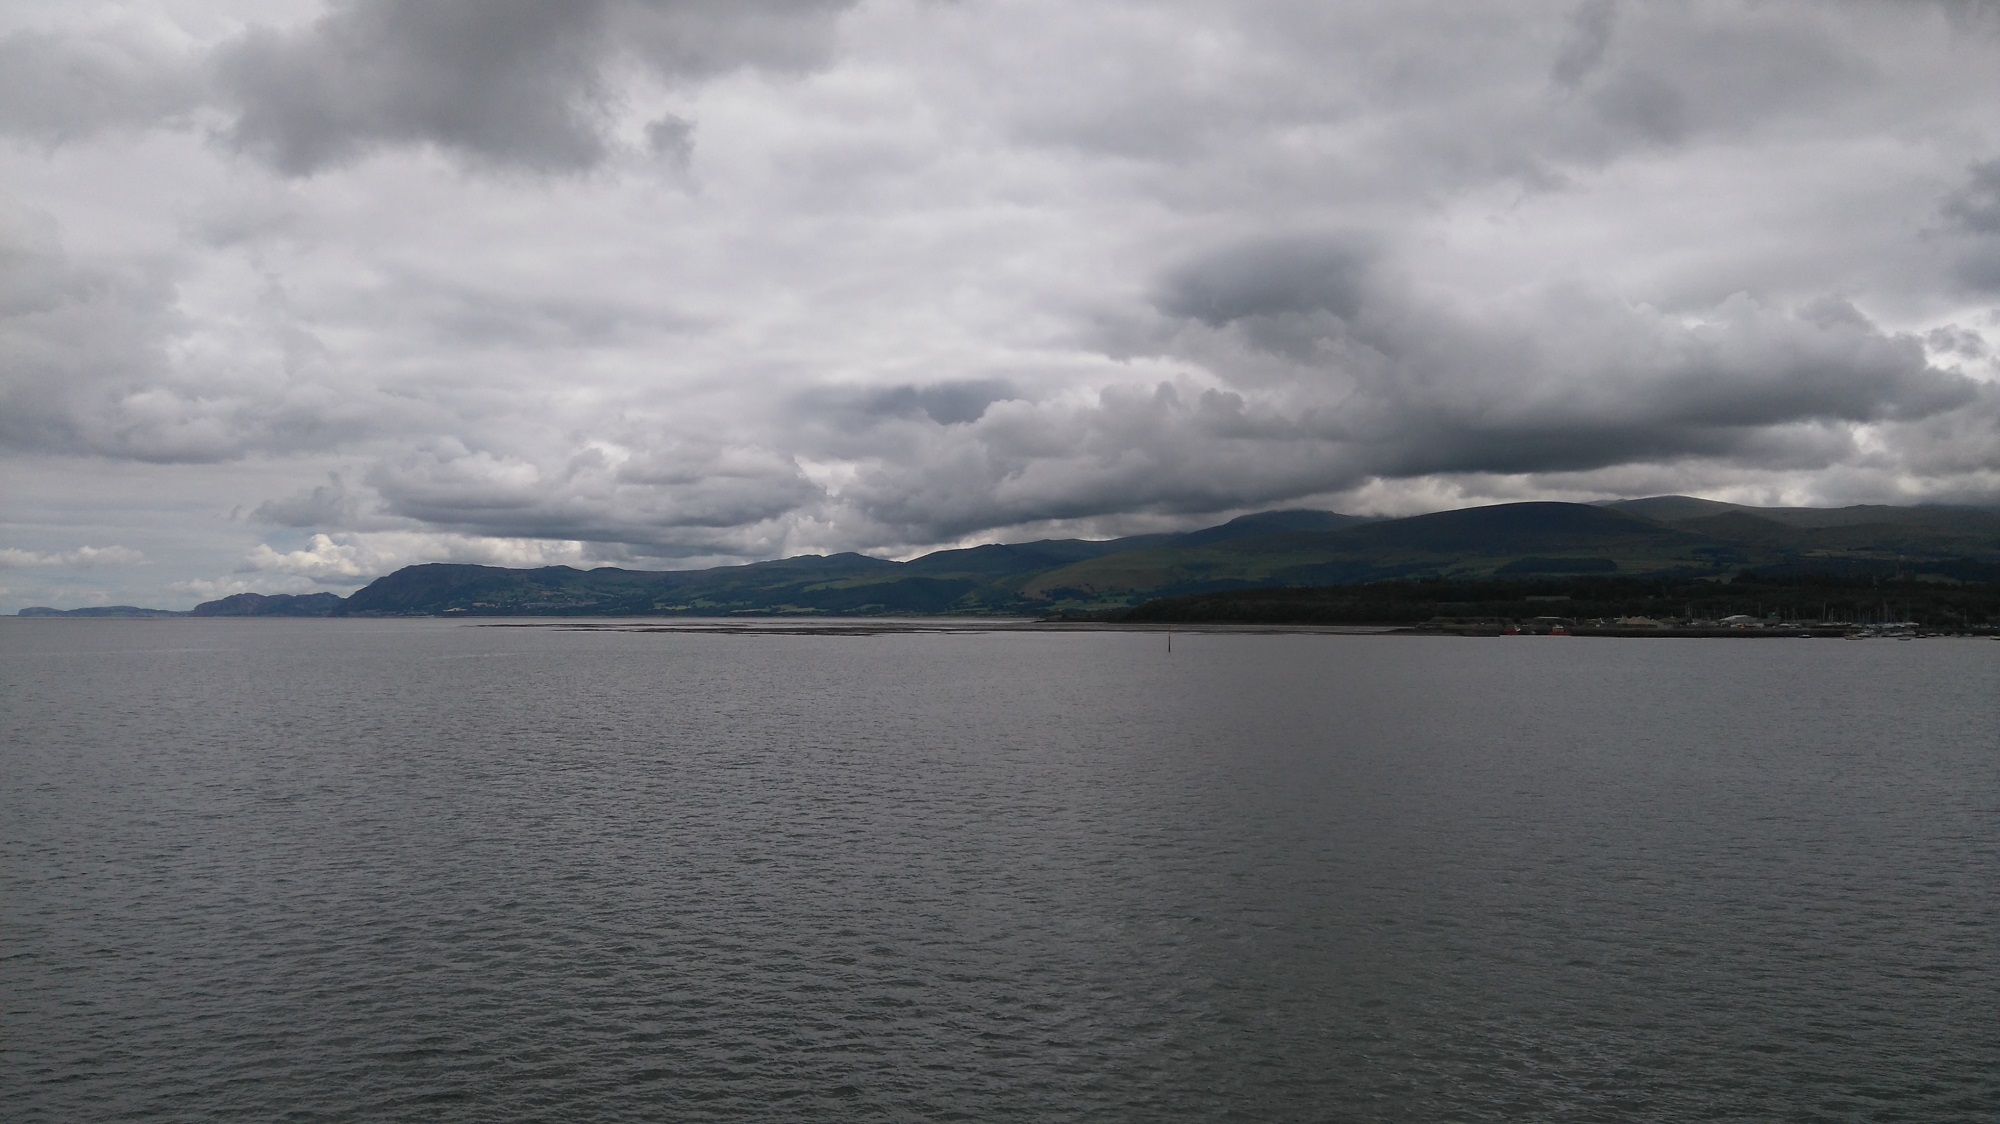 The north Wales coastline on a gloomy summer day, with low clouds hanging over mountains and large hills.